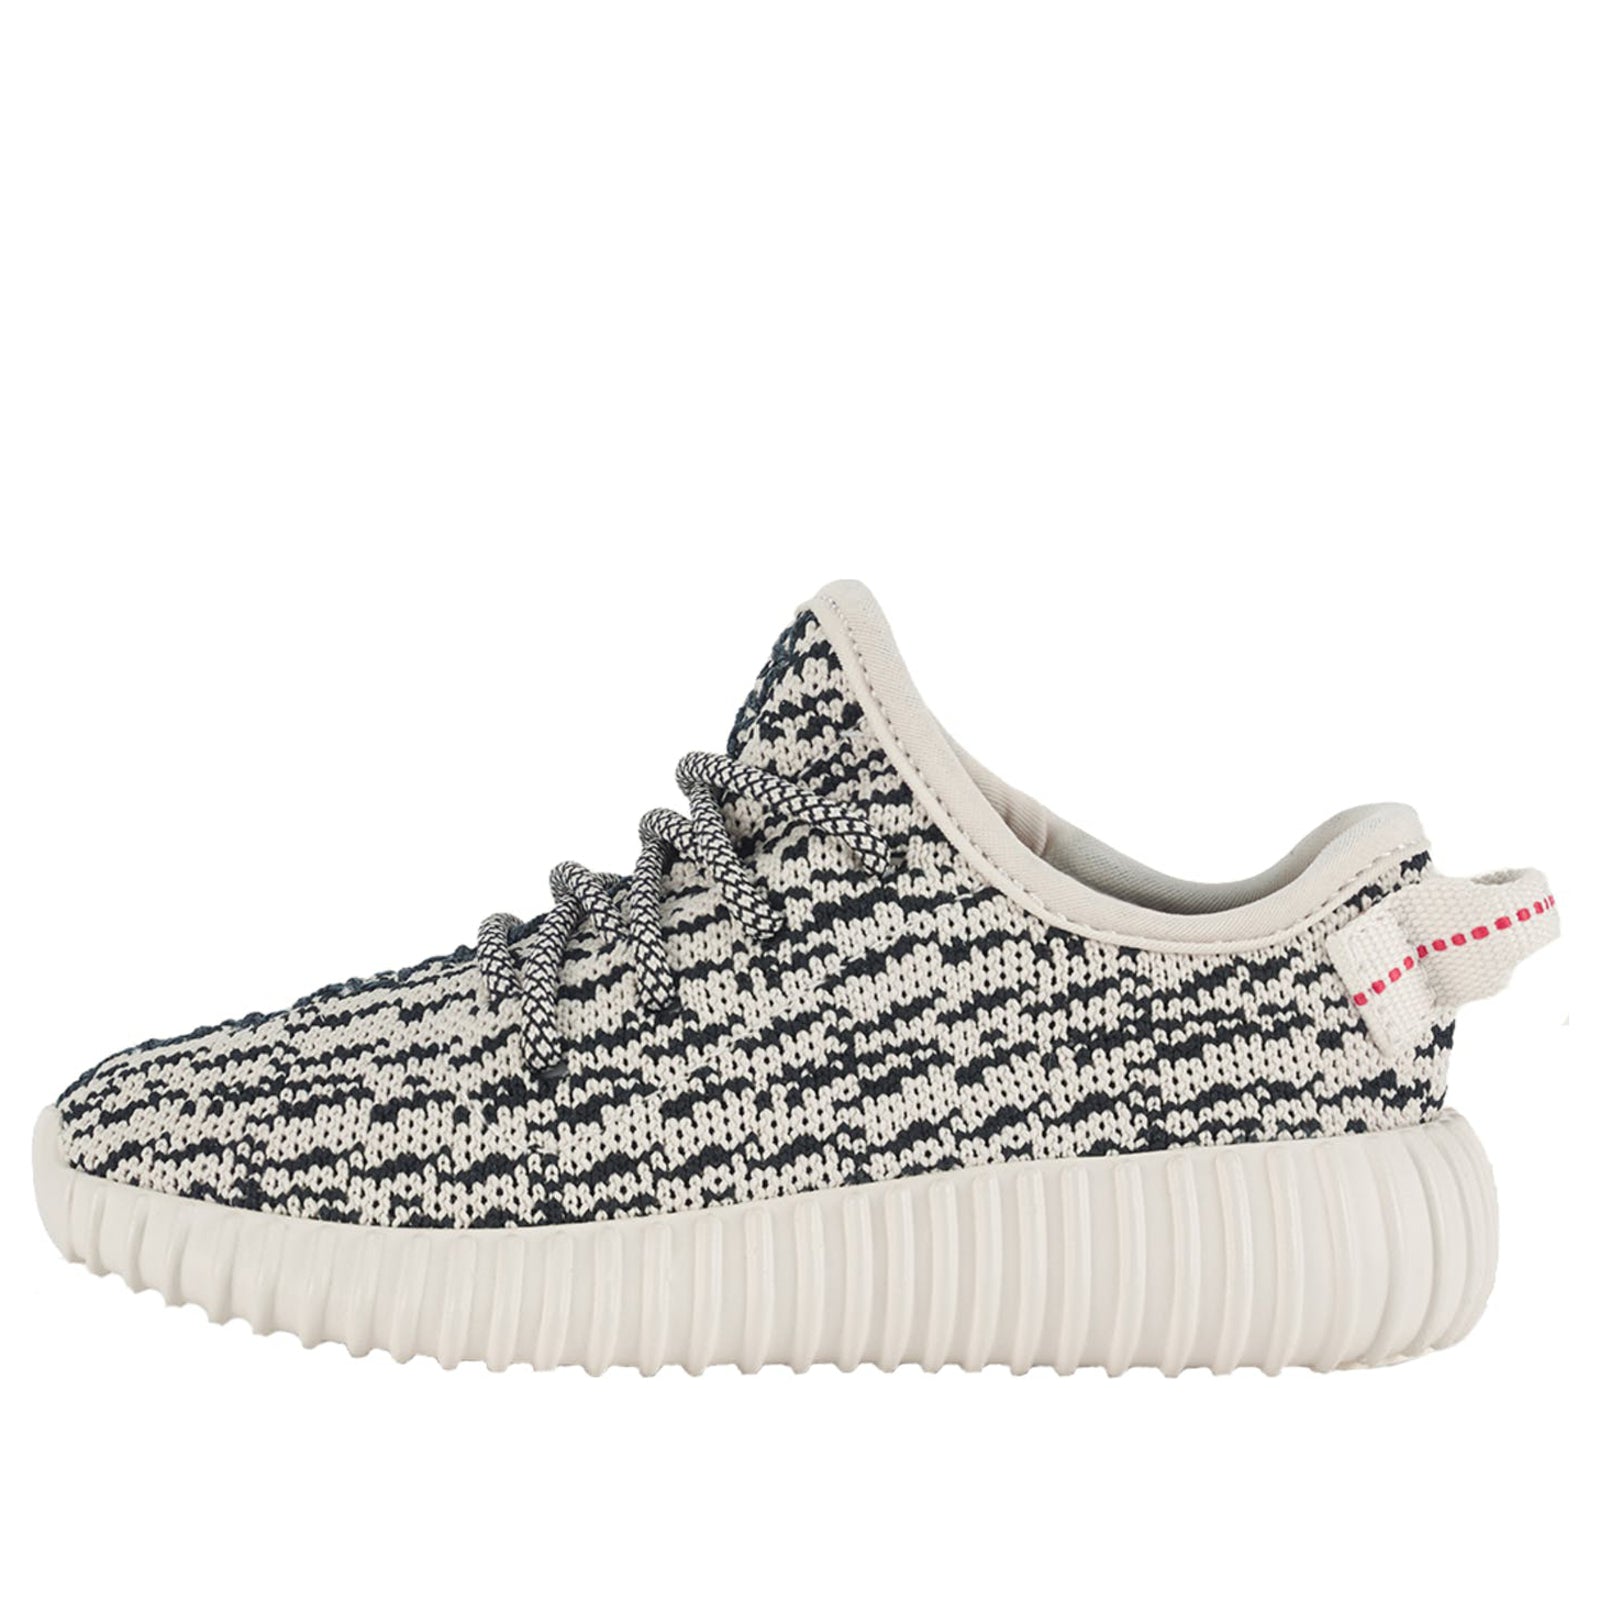 125.00 - Adidas Yeezy Boost 350 Infant 'Turtle Dove' Turtle Dove/Blue  Gray/Core White BB5354 - www.get-sneakers.com